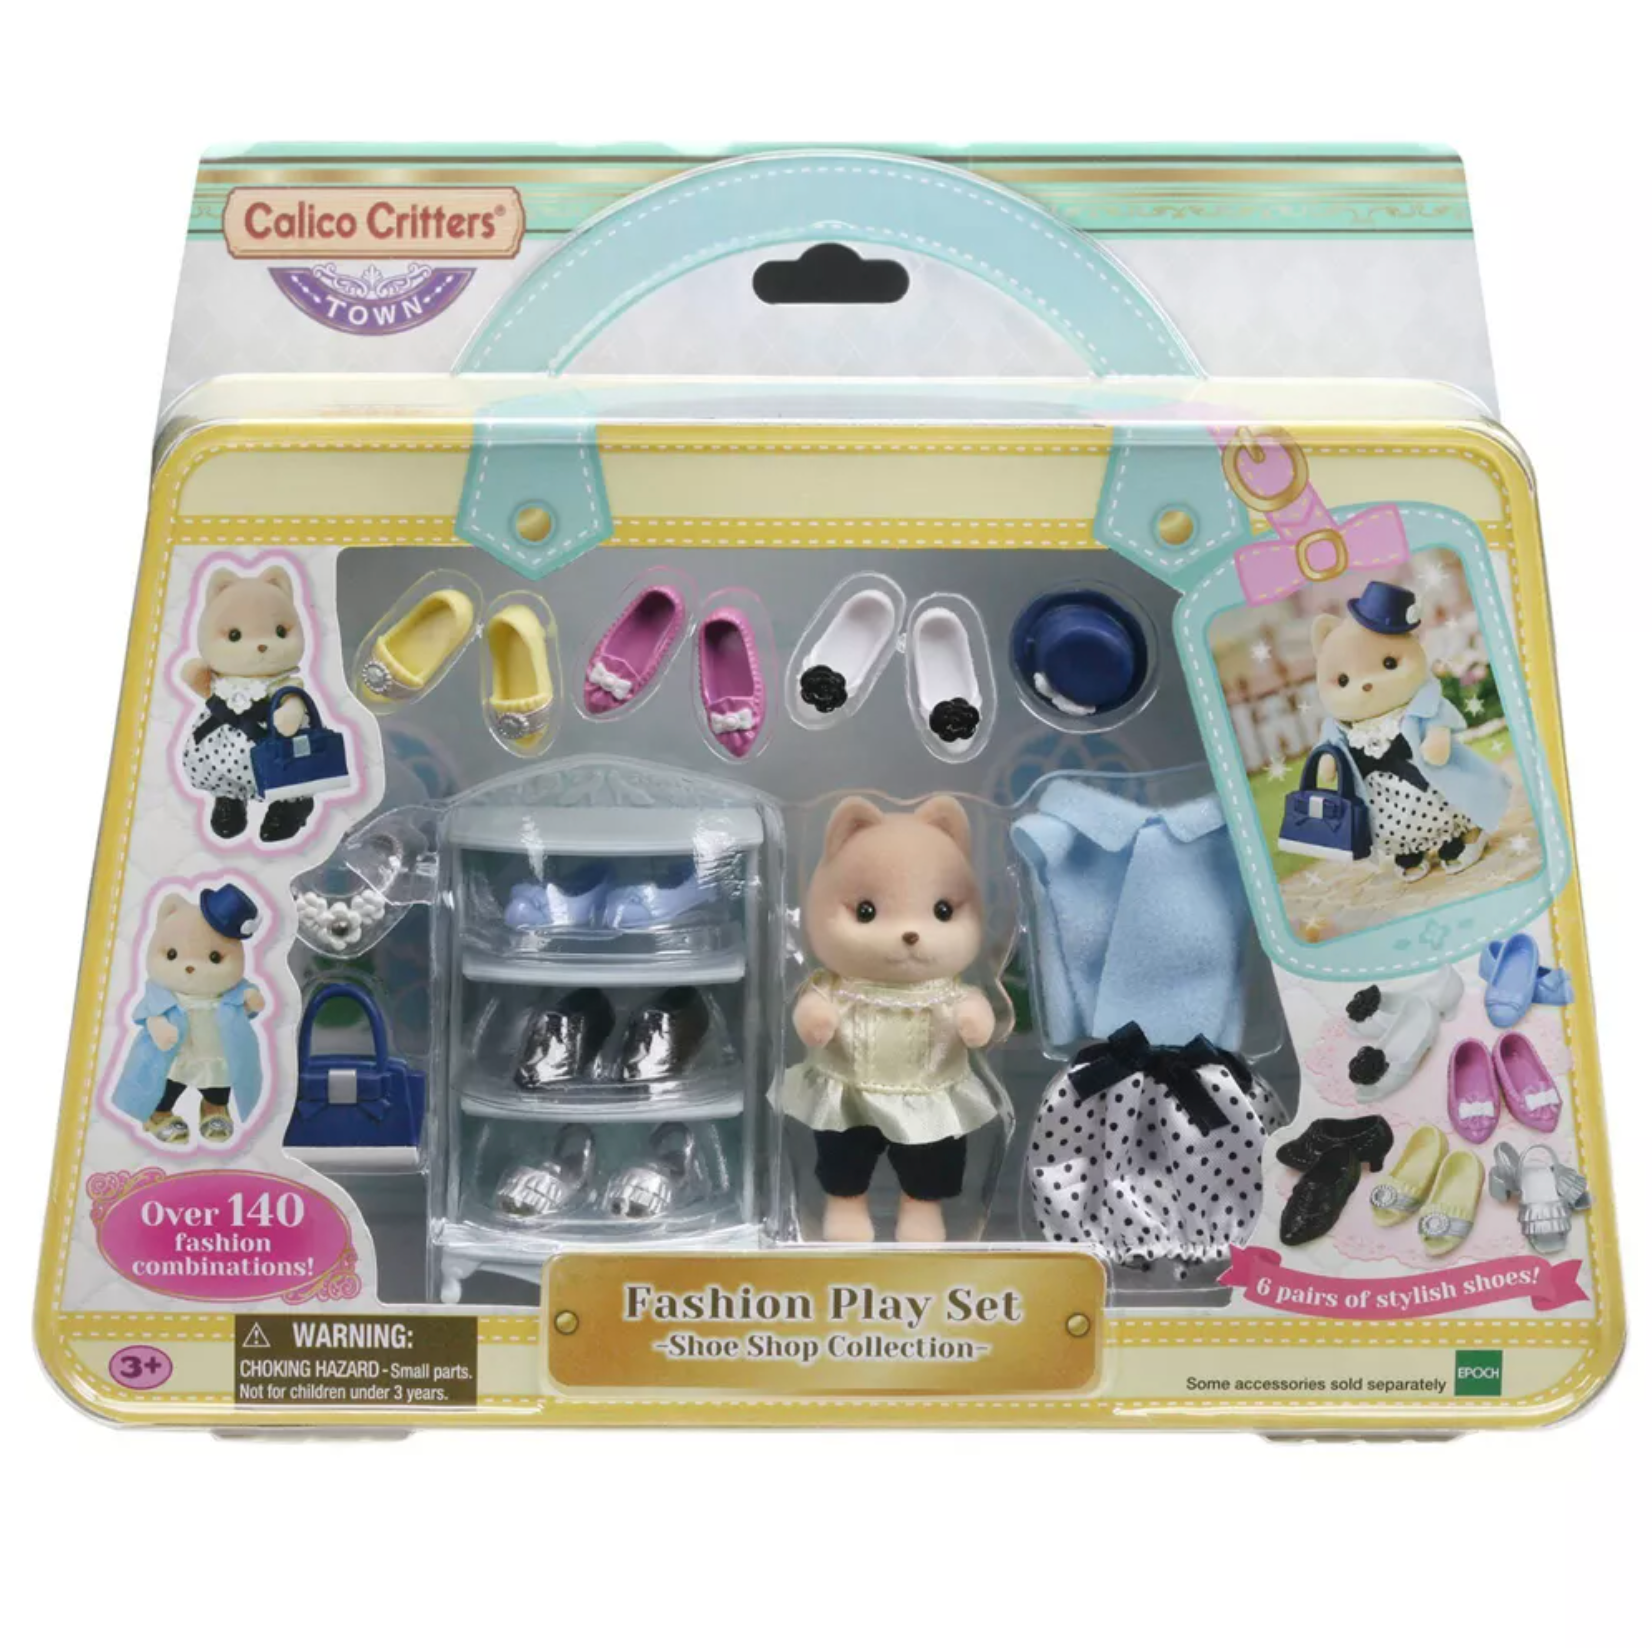 Calico Critters Fashion Play Set - Shoe Shop Collection